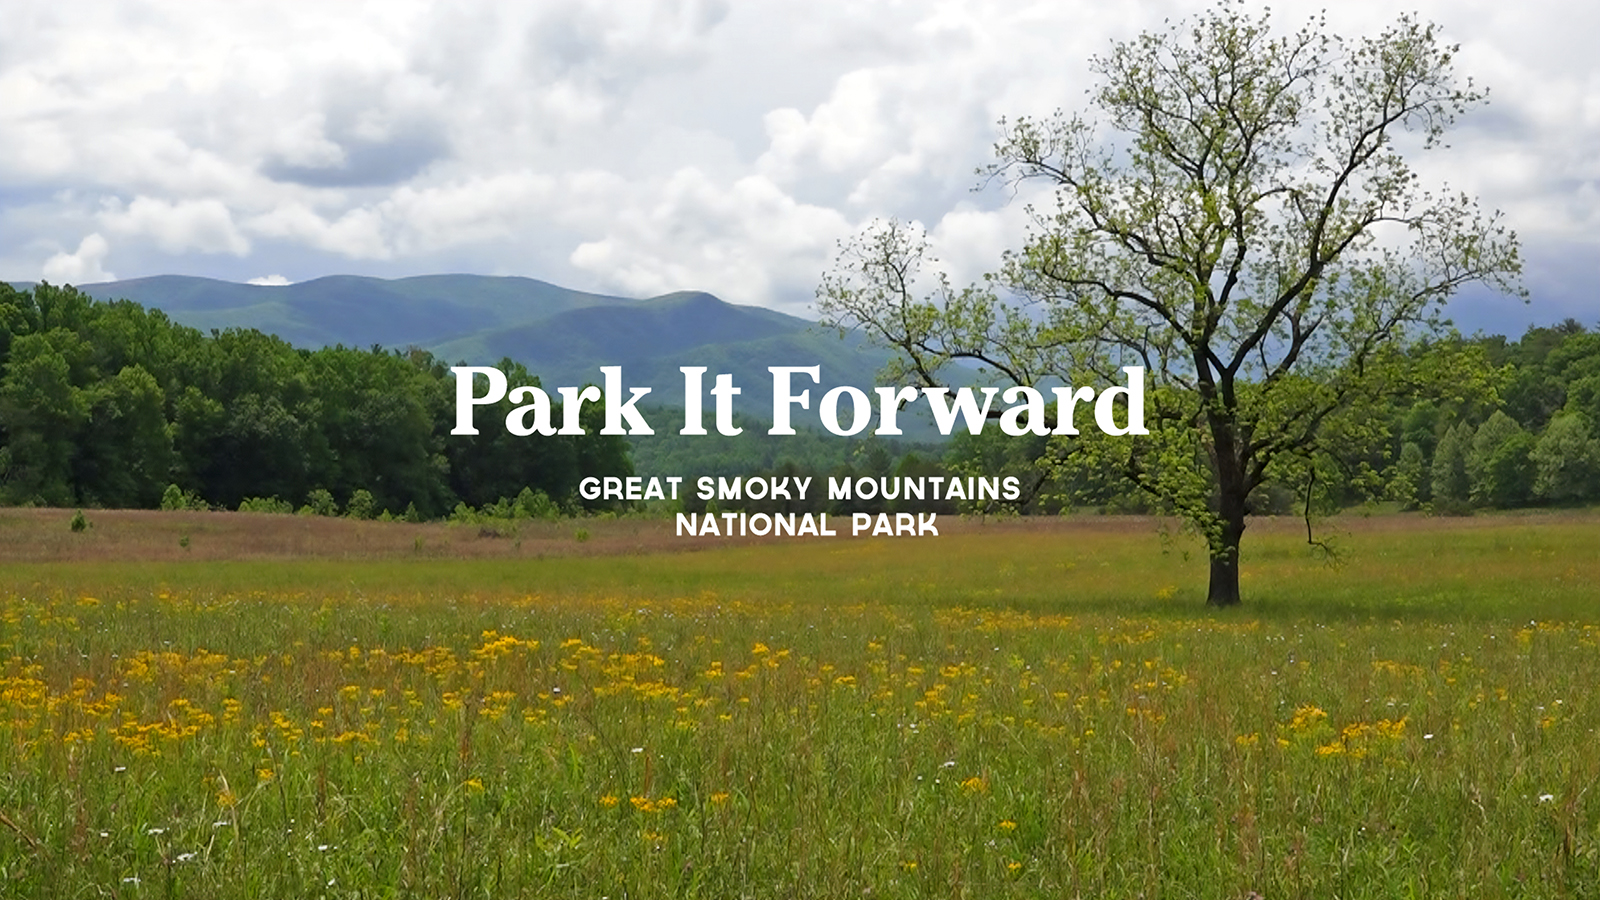 Mountain meadow with wildflowers and a tree in the foreground with mountains in the background and the words Park it Forward, Great Smoky Mountains National Park centered on the image